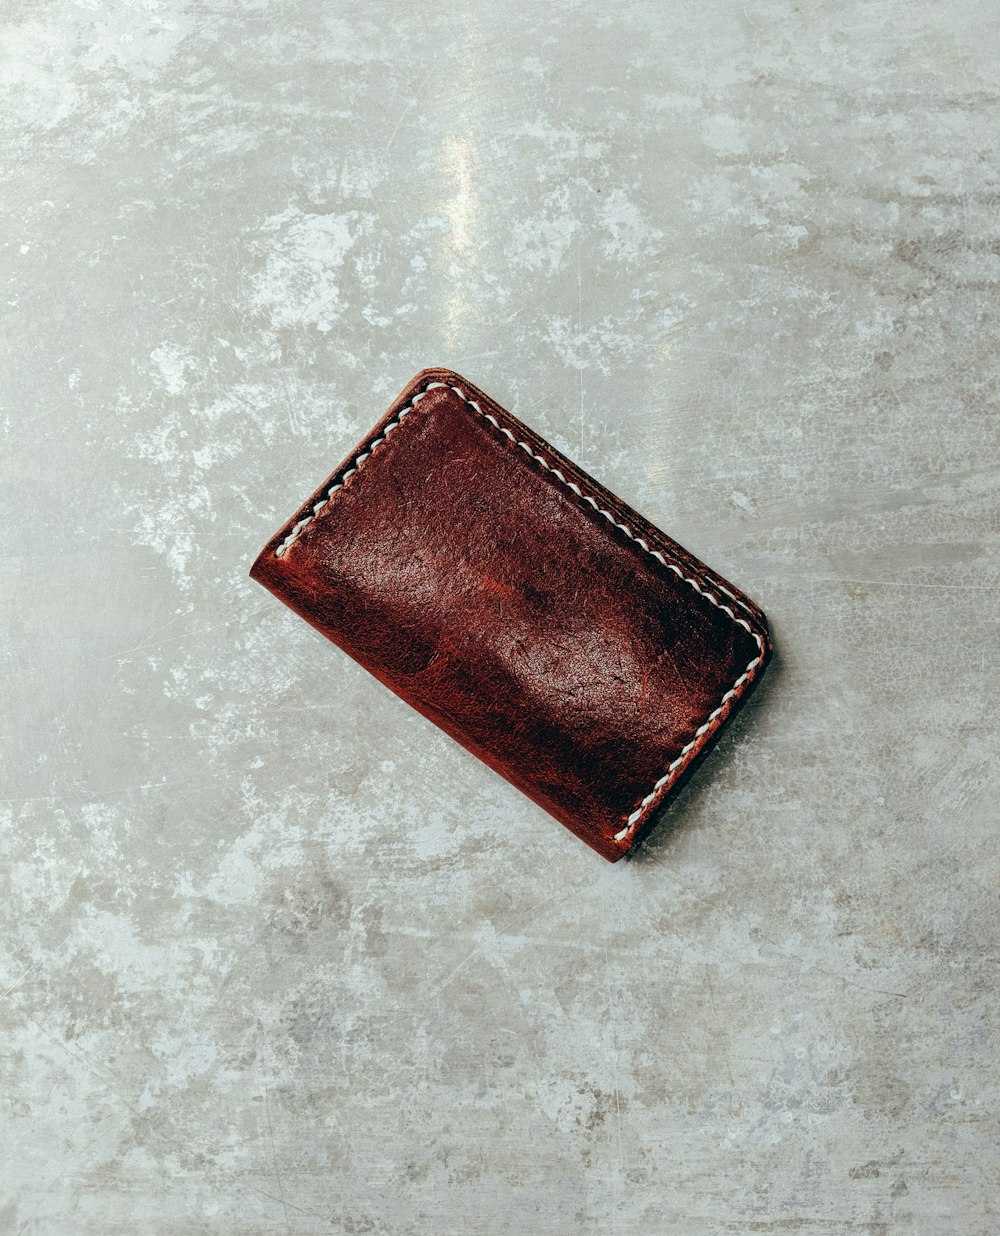 closed brown leather wallet on concrete